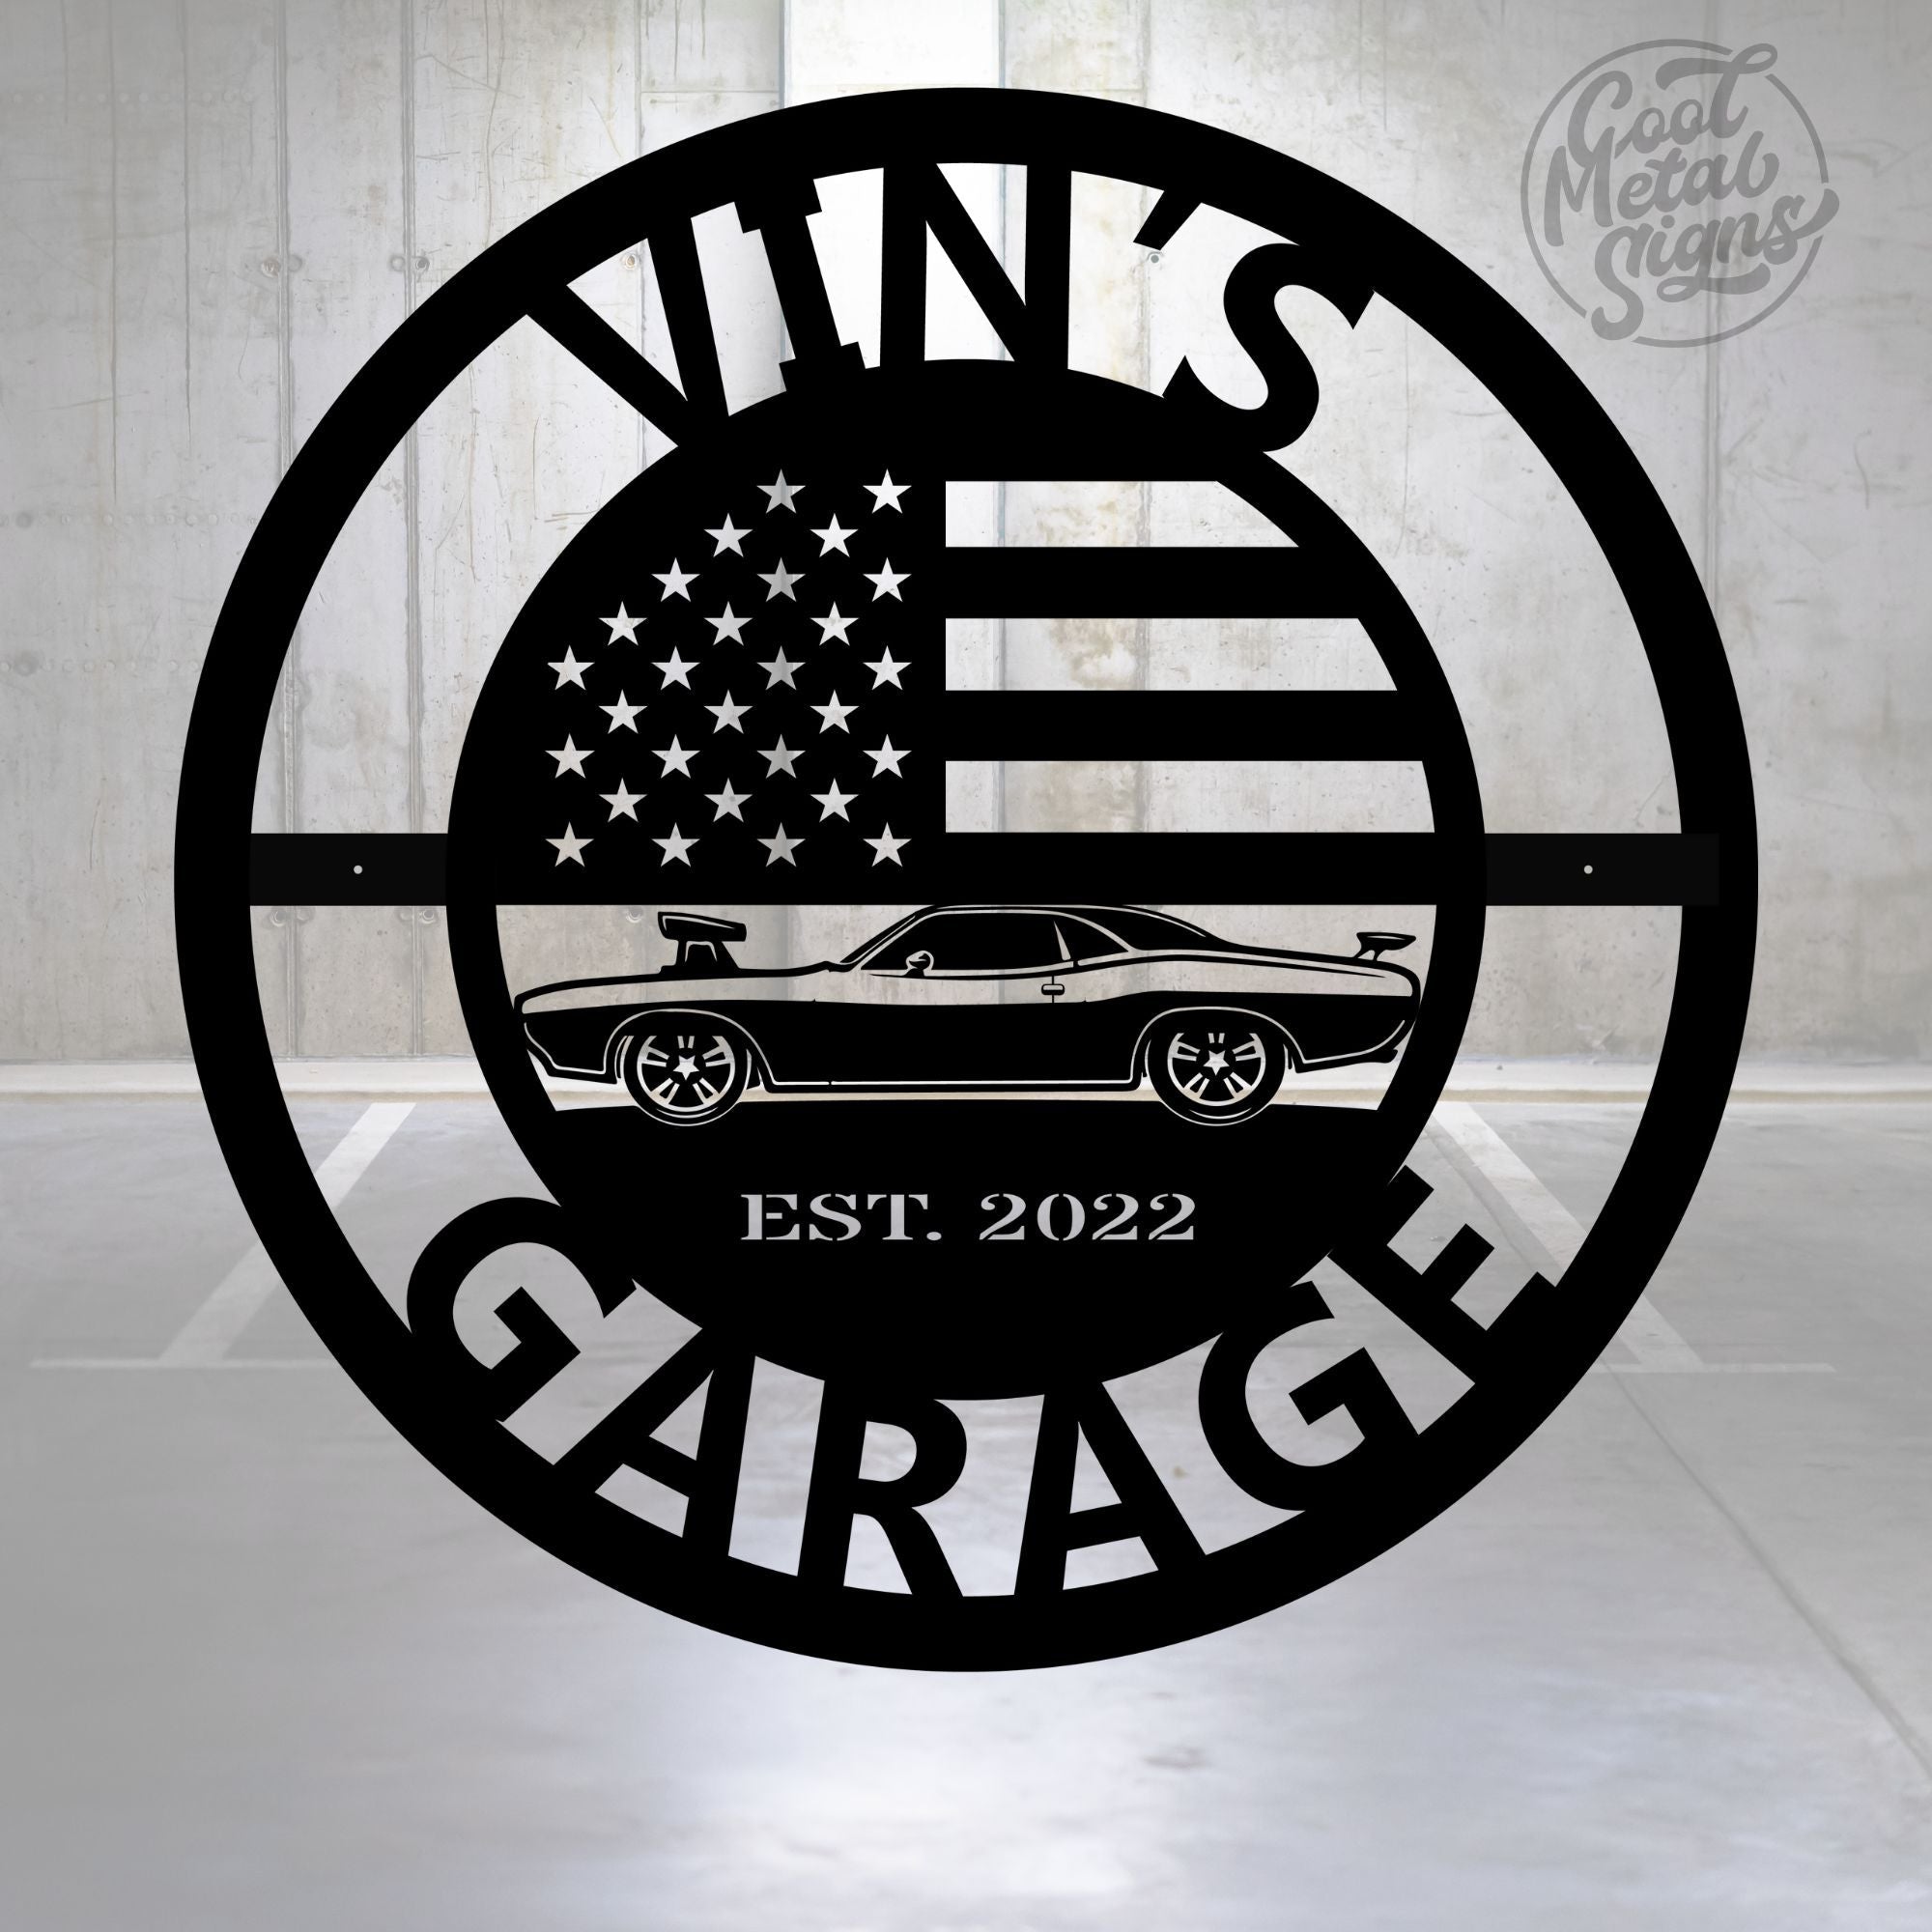 Personalized Hot Rod Garage Sign - Cool Metal Signs